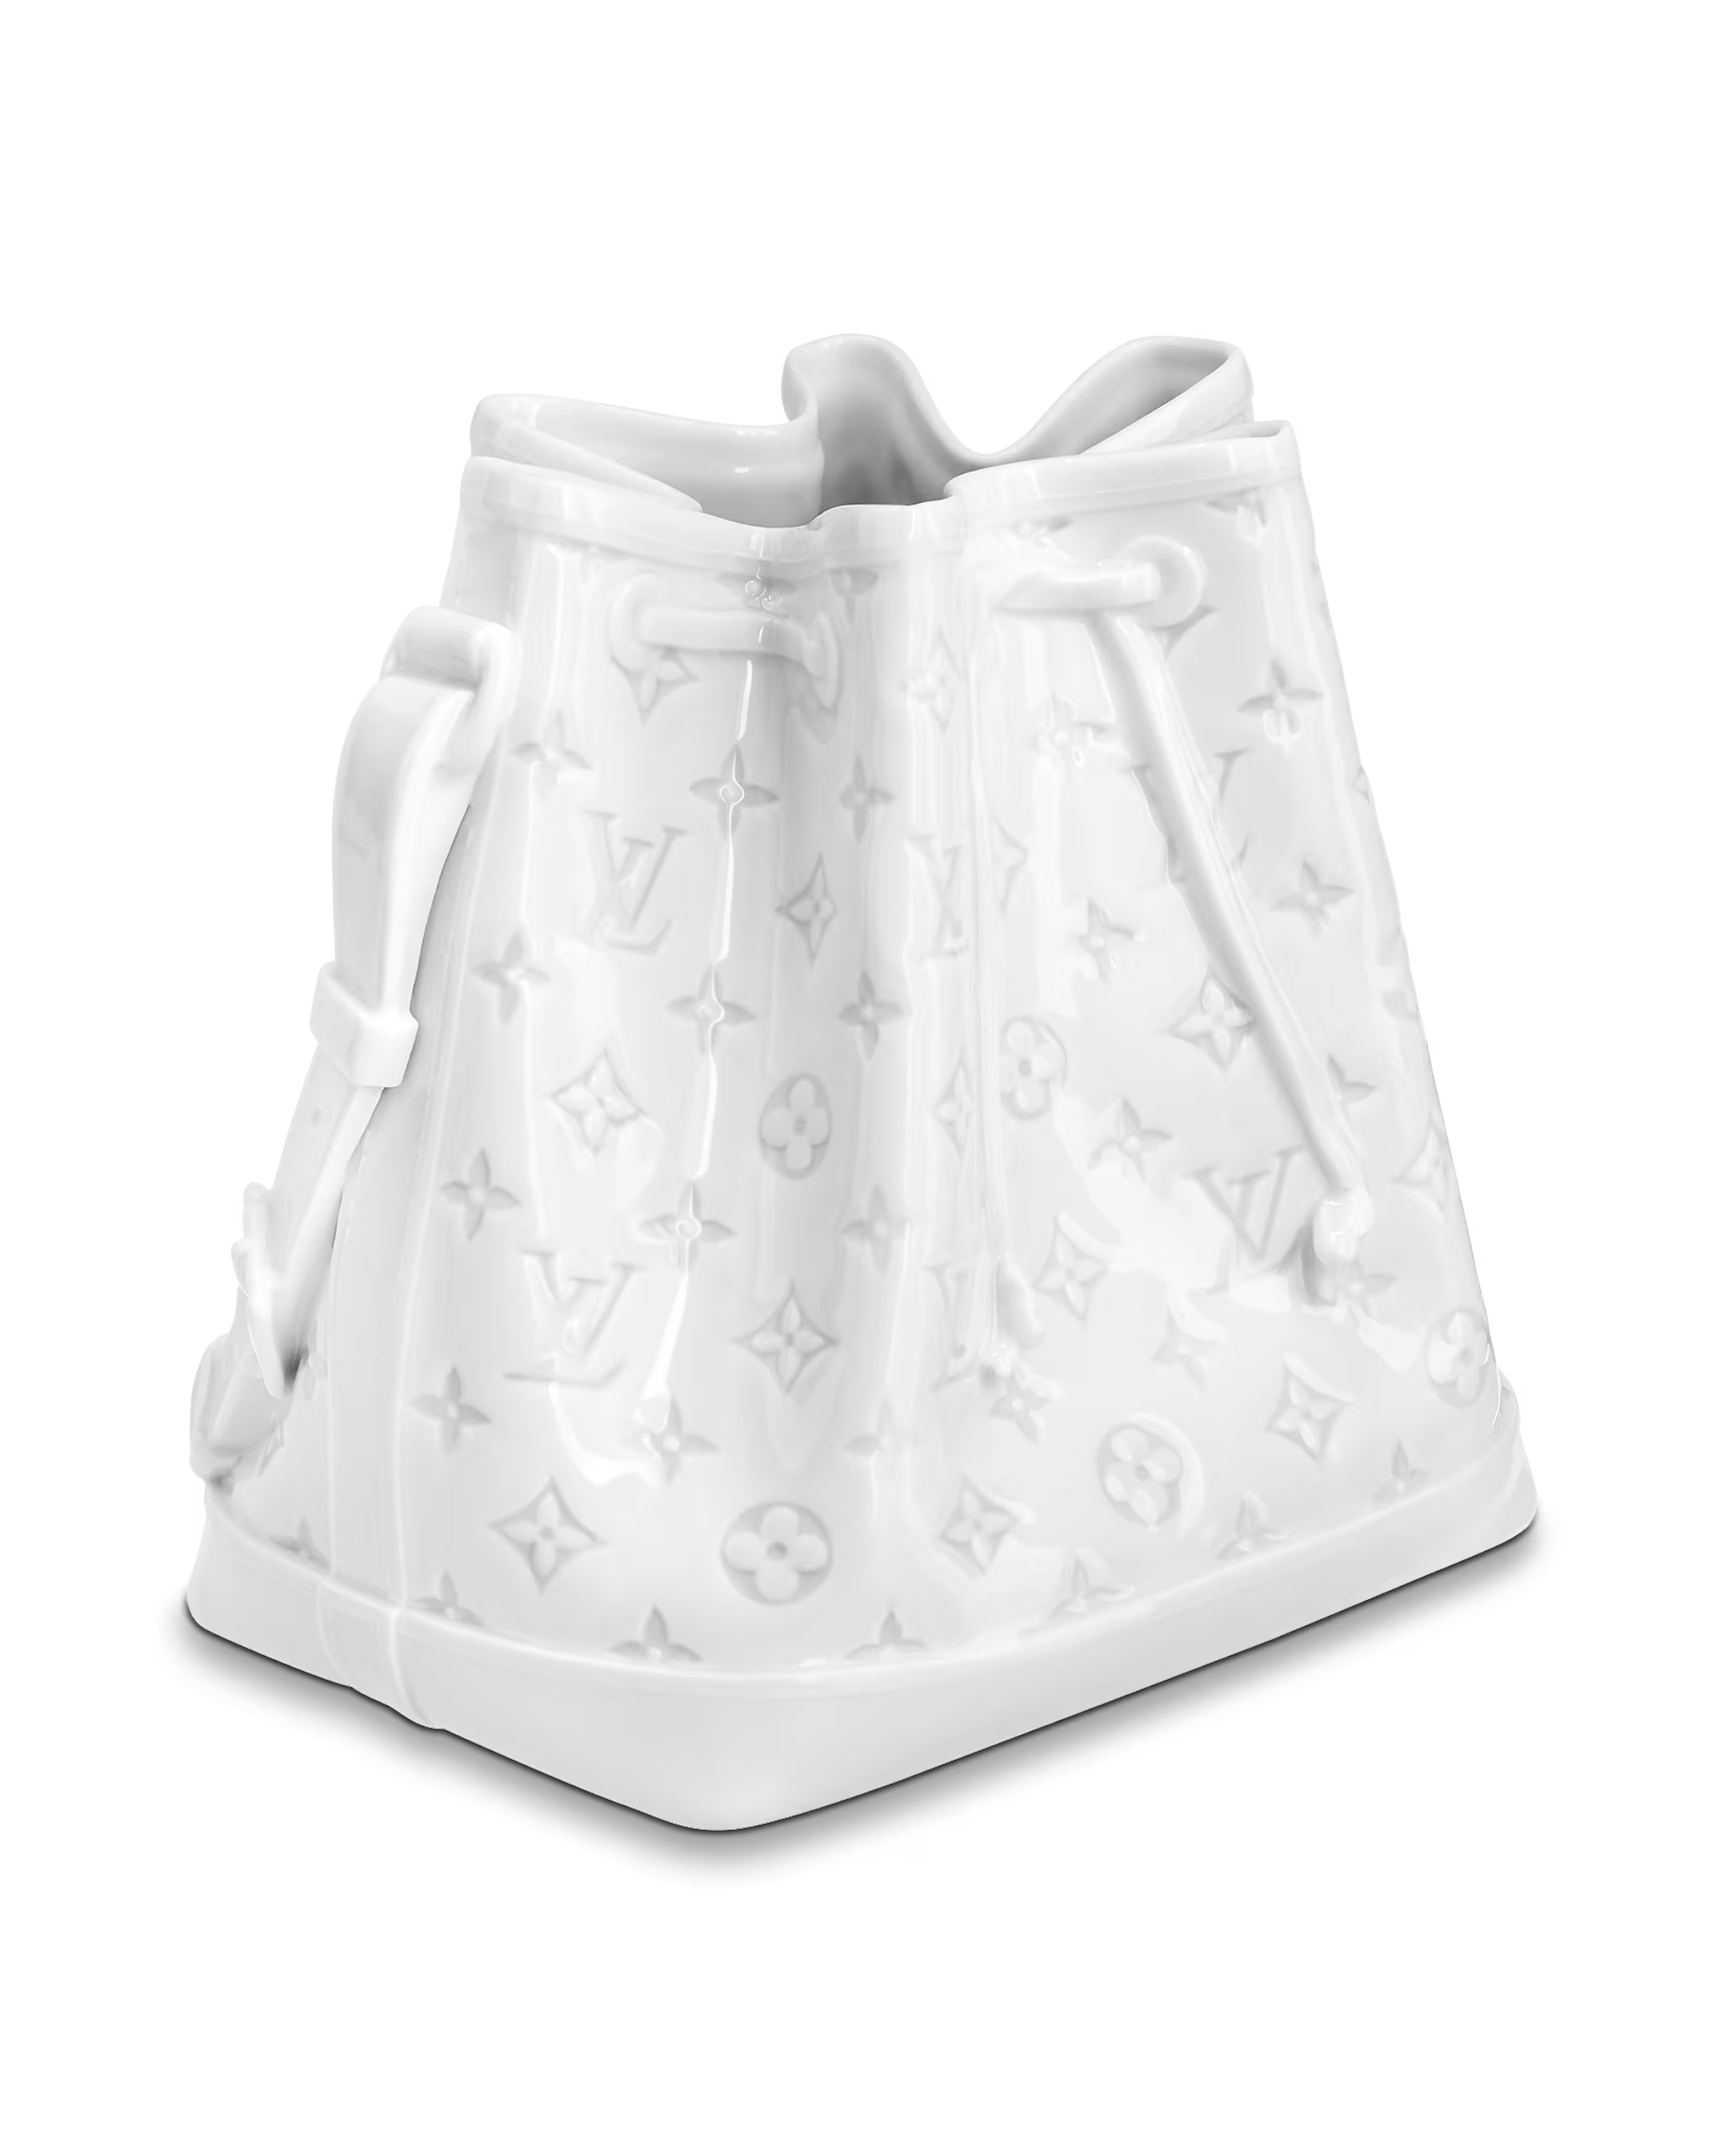 Louis Vuitton Drops $2K Bag Vase For the Holidays